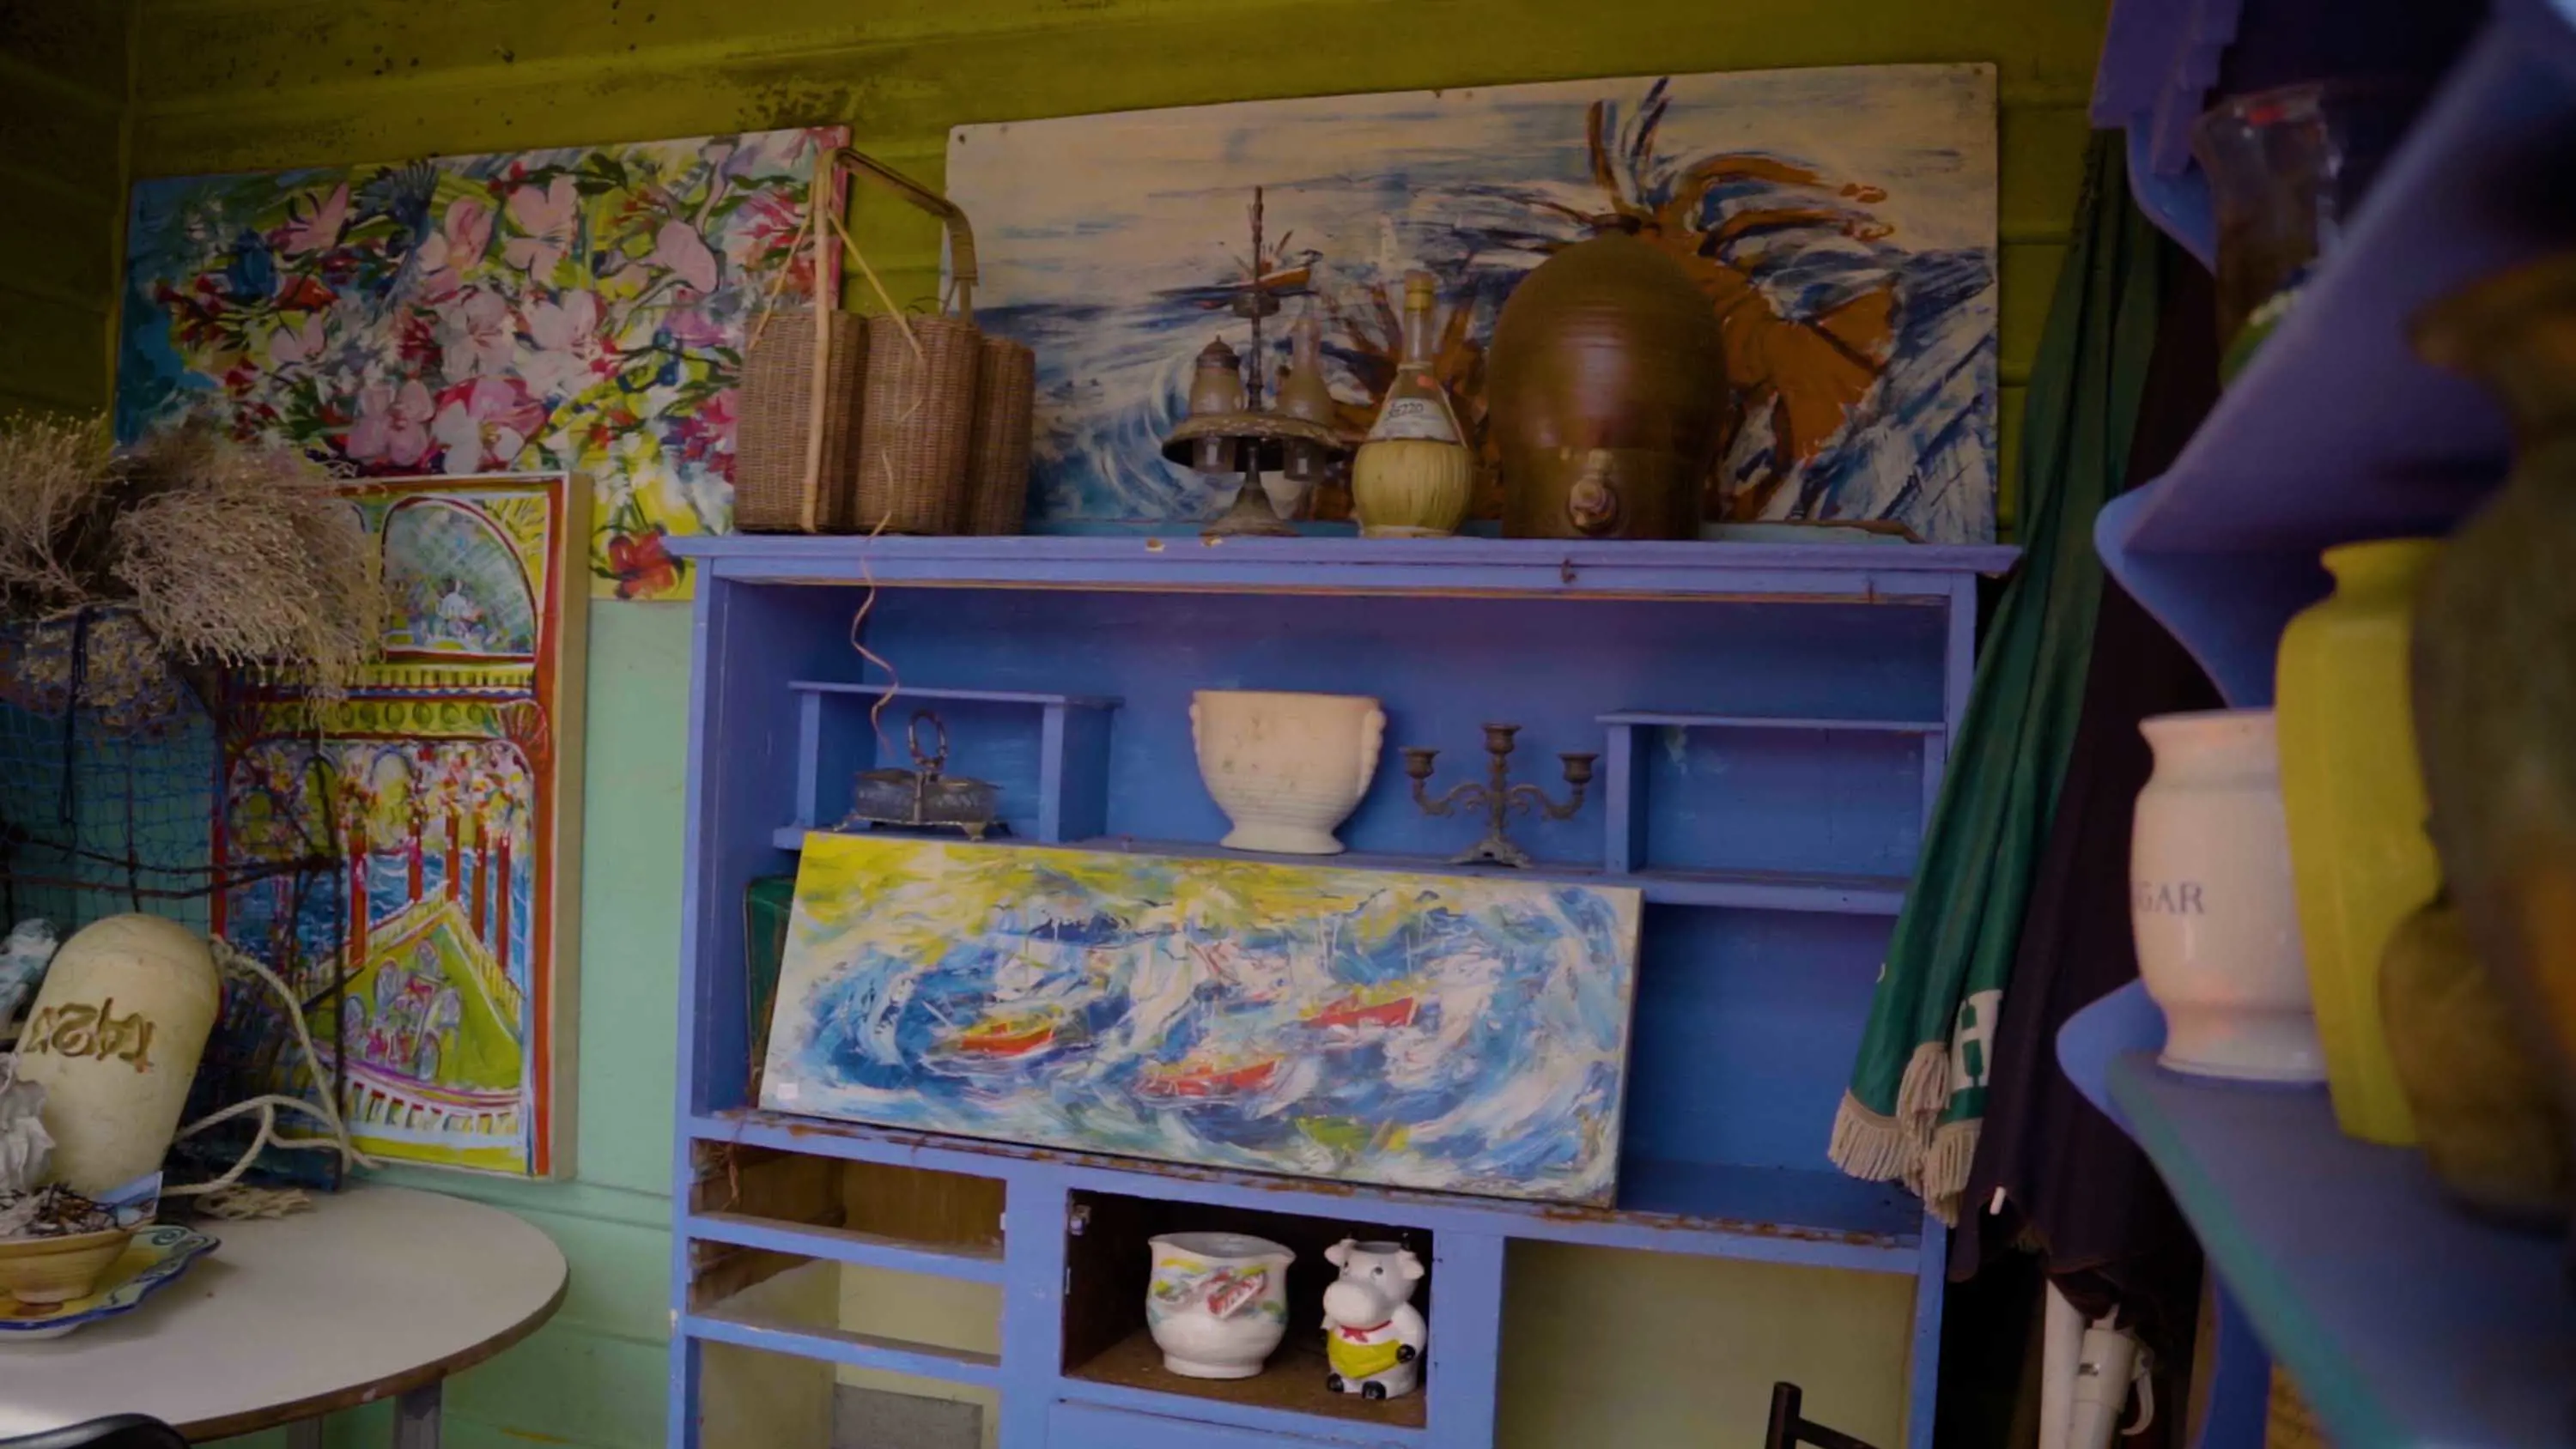 A painting of a wild sea with boats sits on a the shelf of a lavendar coloured cabinet.